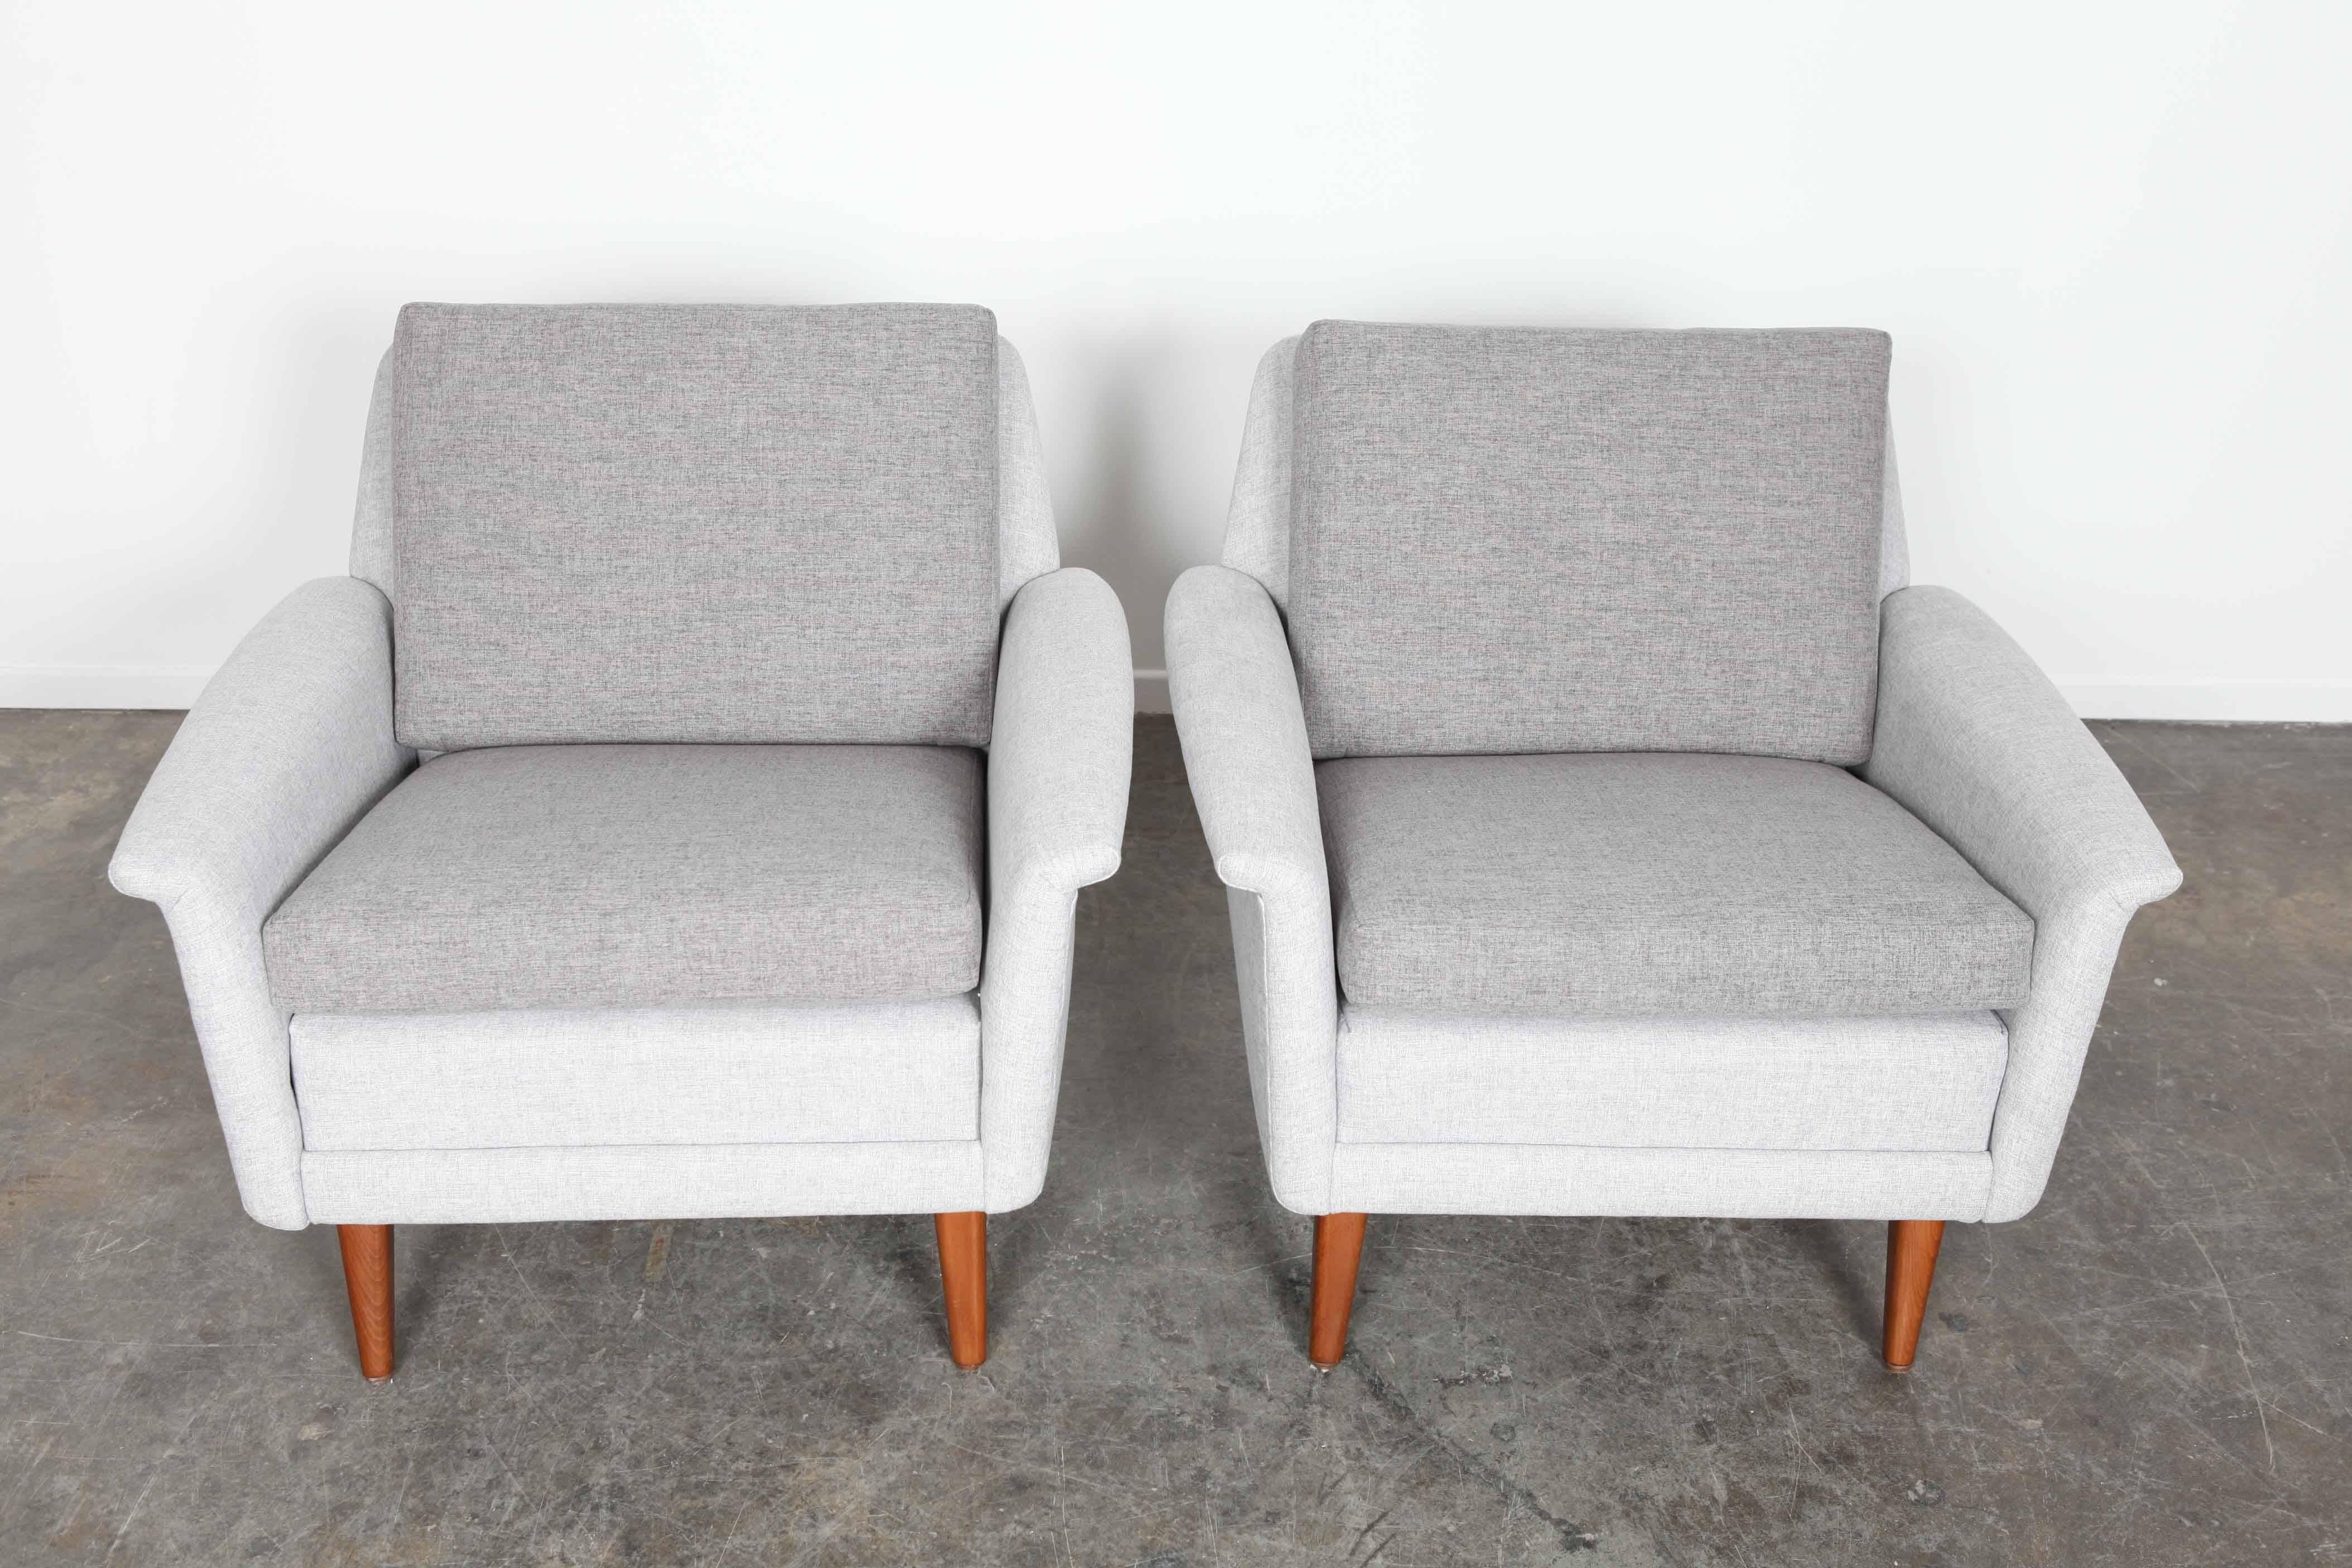 Pair of Swedish 1950s low lounge chairs in fabric, designed by Folke Ohlsson for DUX. Newly reupholstered.